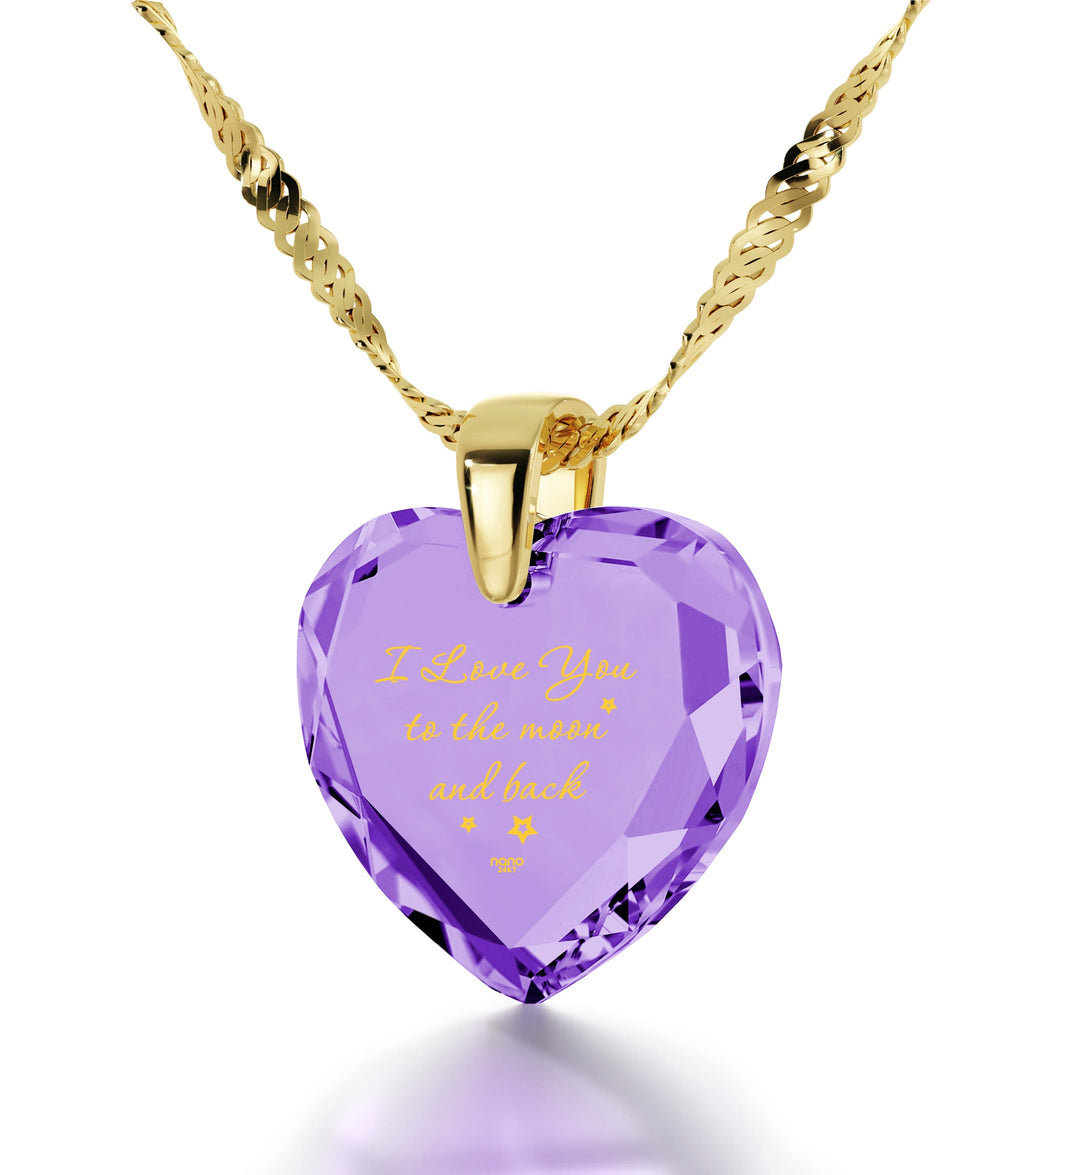 Gold Plated Silver I Love You to The Moon and Back Necklace 24k Gold Inscribed Heart Cubic Zirconia Pendant